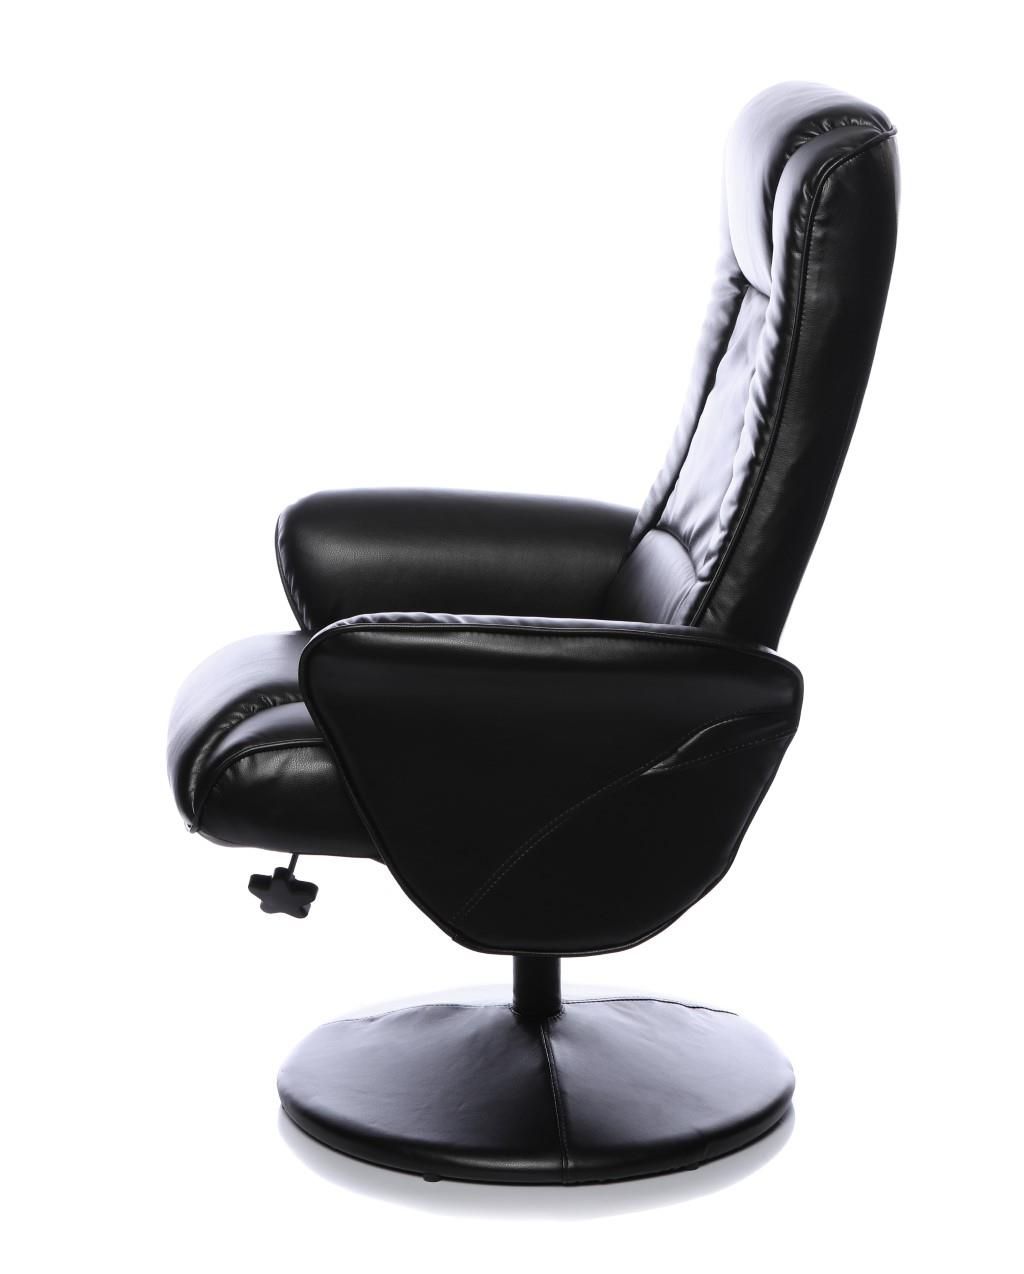 Well Known Naples Black Memory Foam Swivel Recliner Chair In Faux Leather With With Black Faux Leather Swivel Recliners (View 6 of 10)